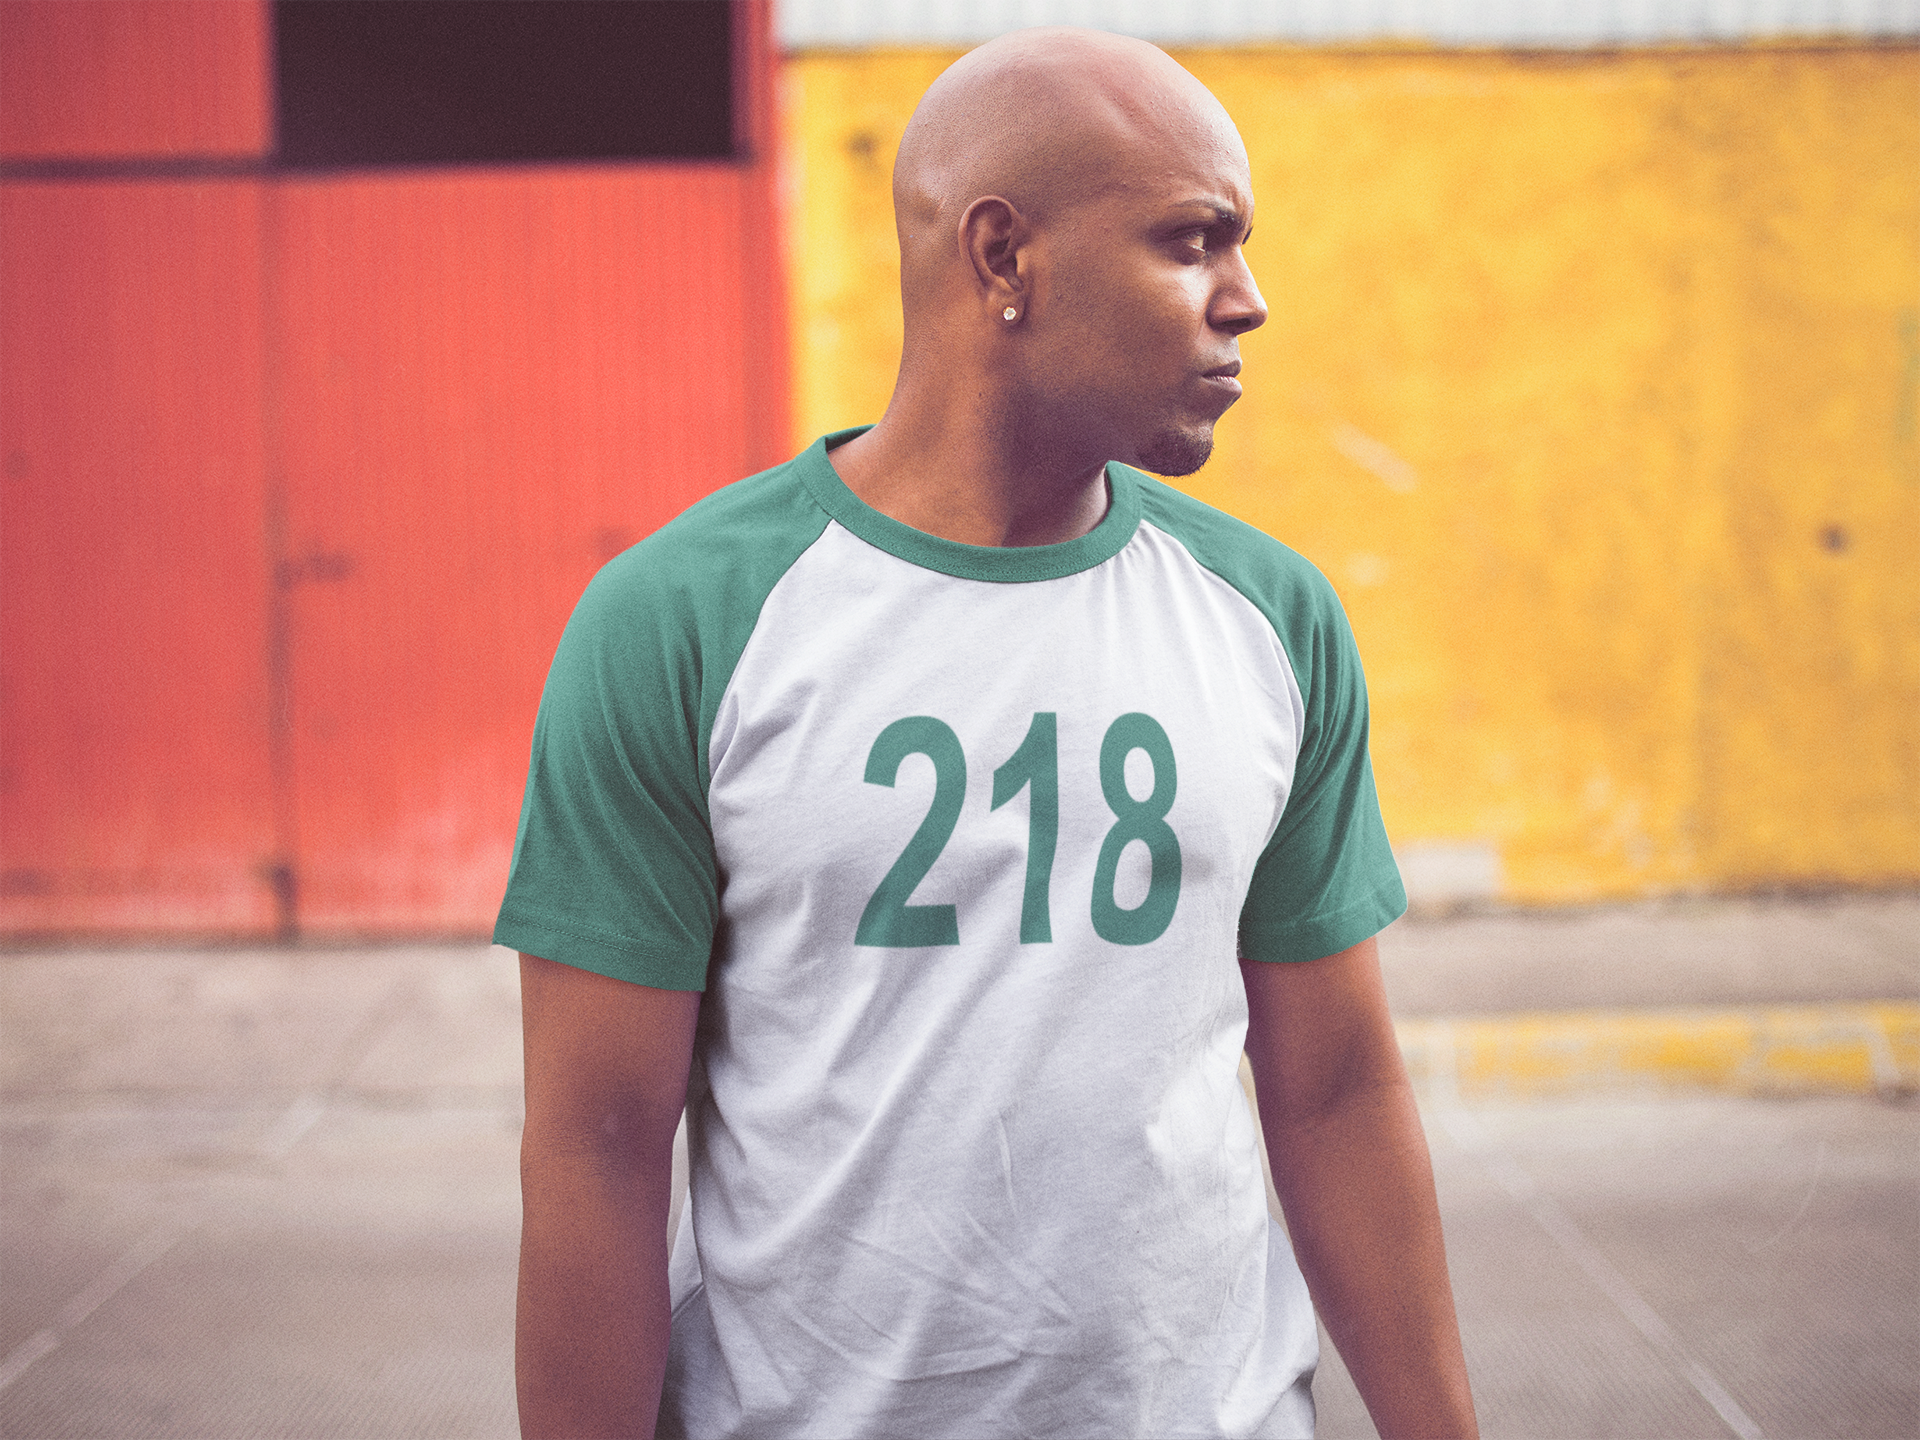 raglan-tee-mockup-of-a-young-handsome-black-man-12475a.png